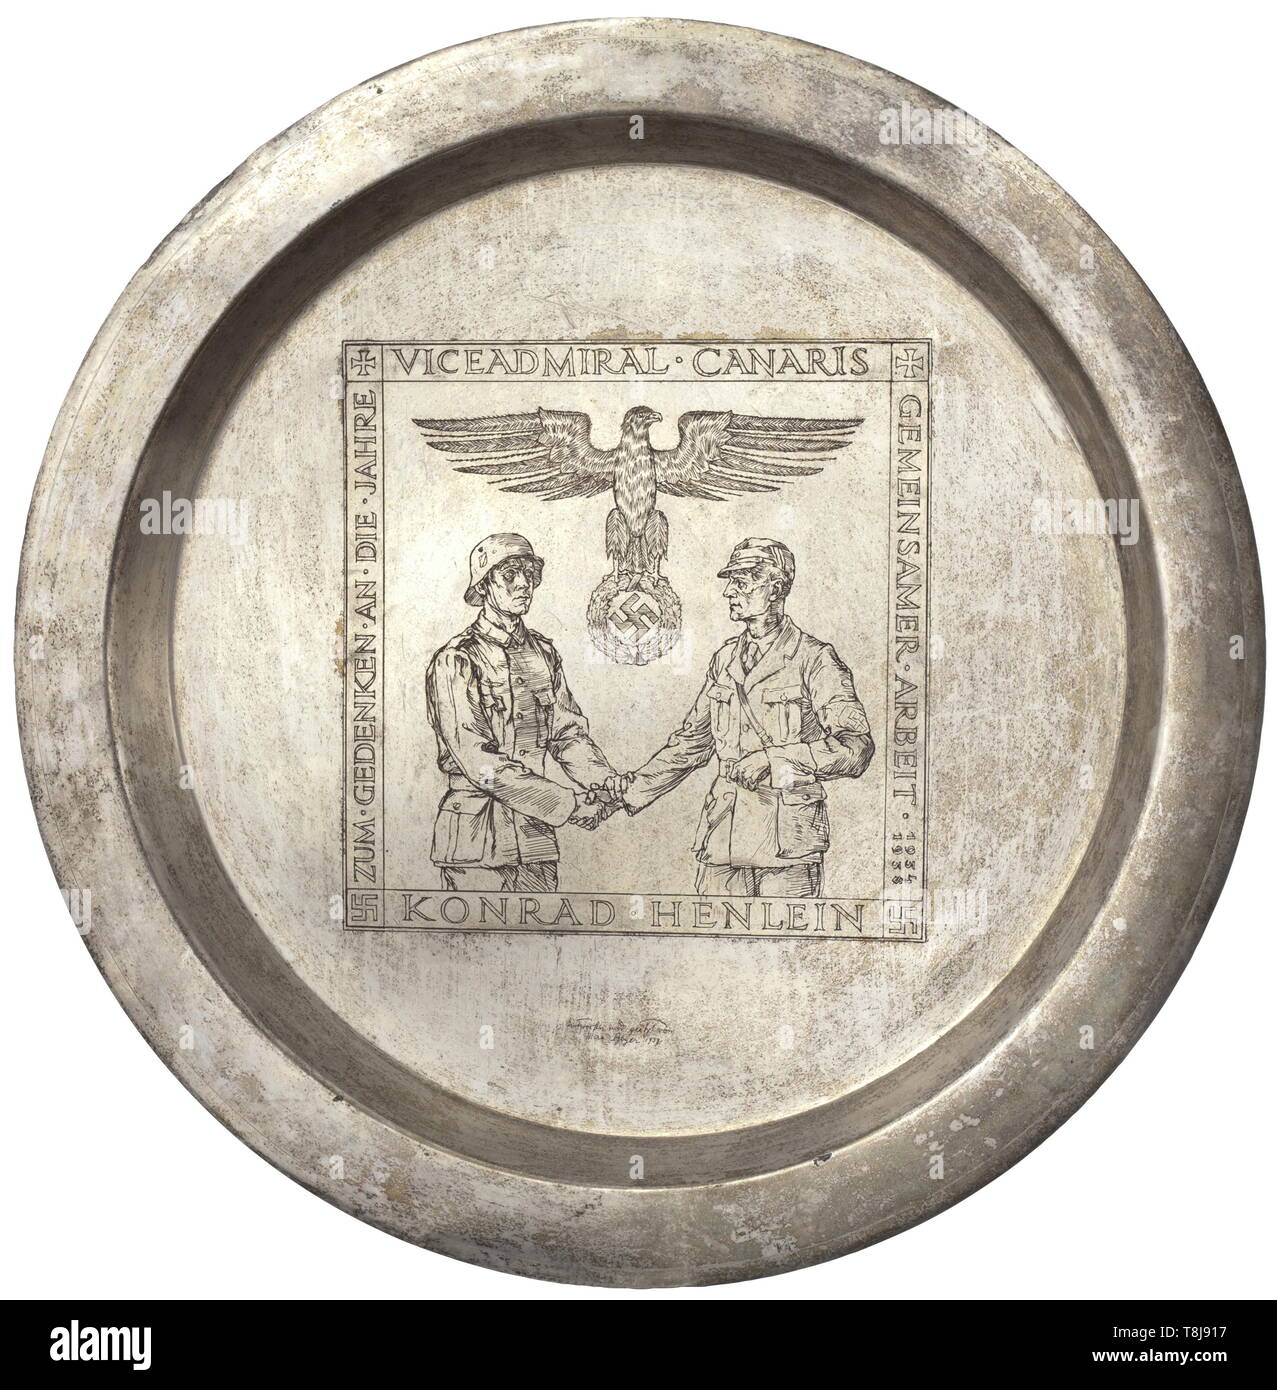 Konrad Henlein - a large presentation plate to the head of the foreign/defence department Wilhelm Canaris 1939 Hard silver-plated edition with elevated rim, the centre with etched depiction of a handshake between Wehrmacht and Party under the national eagle. Continuous dedication (tr.) 'Vice admiral Canaris - In commemoration of the years of cooperation 1934-1935 - Konrad Henlein', thereunder (tr.) 'Drafted and etched Max Geyer 1939'. On the reverse side a suspension hook. Diameter 51.5 cm. Max Geyer (1904 - 1958), Czechoslovakian painter and illustrator, studied at the Aca, Editorial-Use-Only Stock Photo